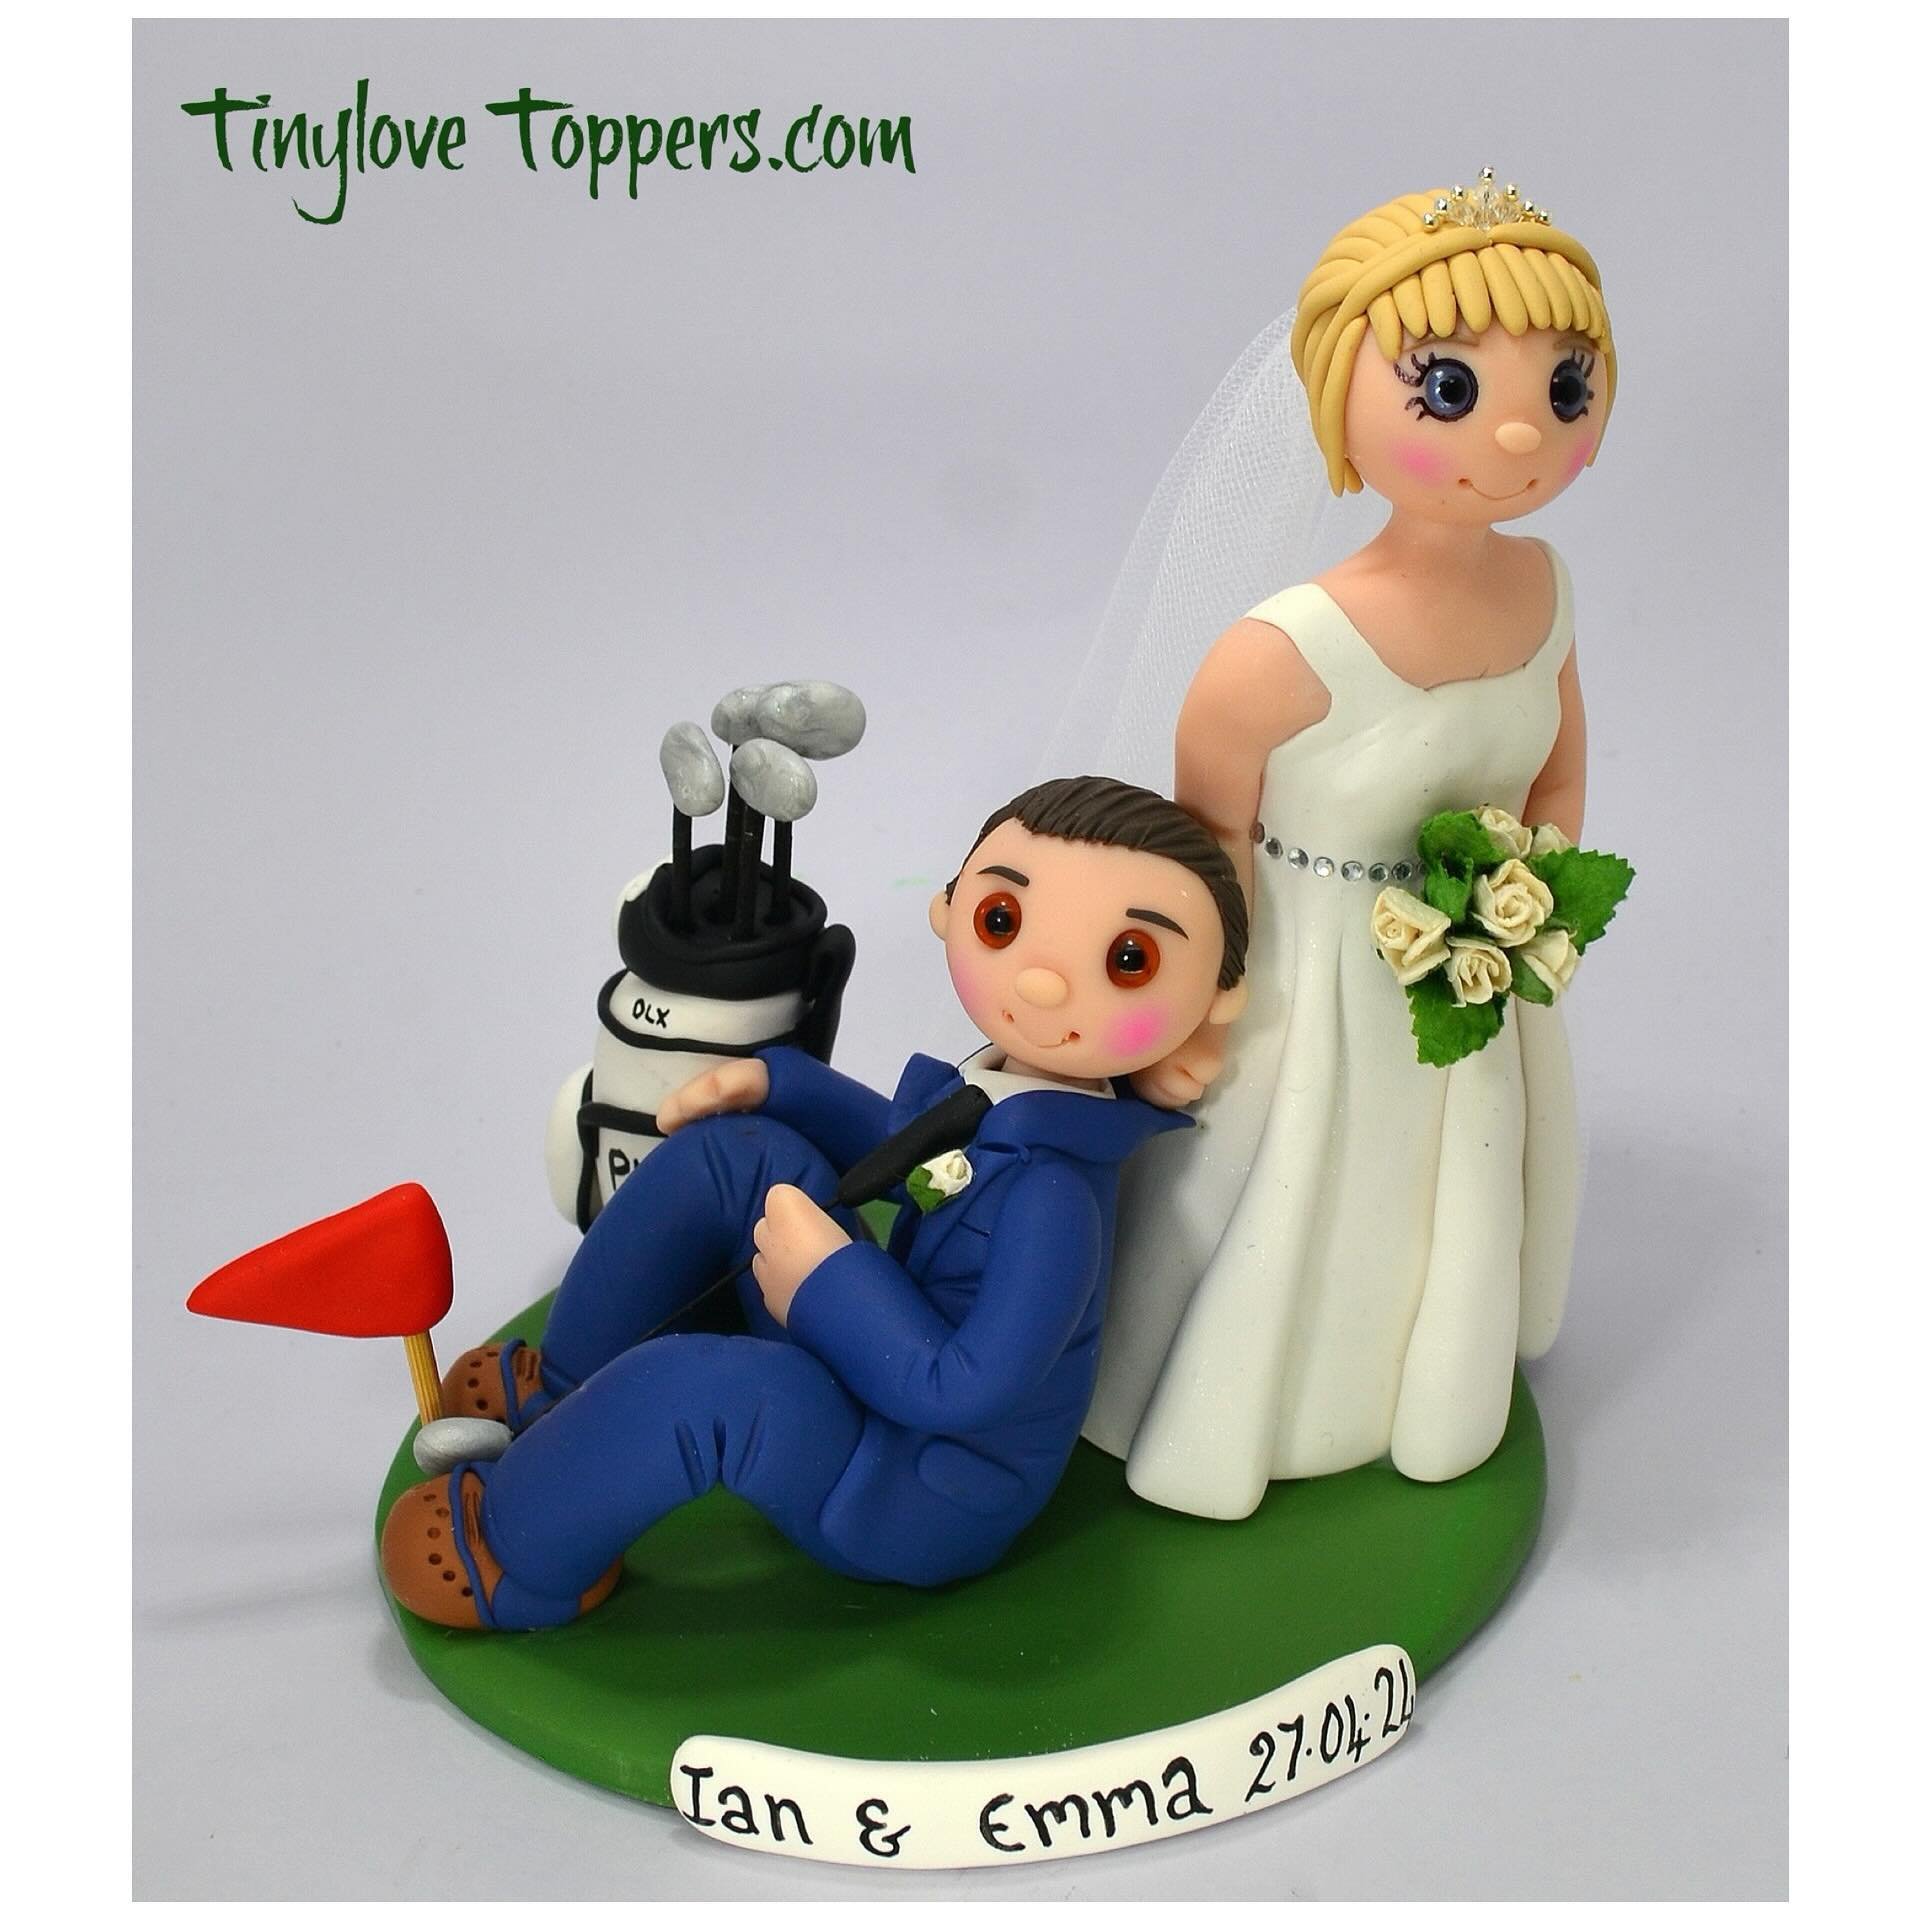 Golfing Wedding Cake Topper.

Personalised non edible wedding cake toppers.
made to look like you, lifelong keepsakes.
Message me if you would like a quote for yours. 🙂
Follow me on Instagram https://www.instagram.com/tinylove_cake_toppers/
#wedding